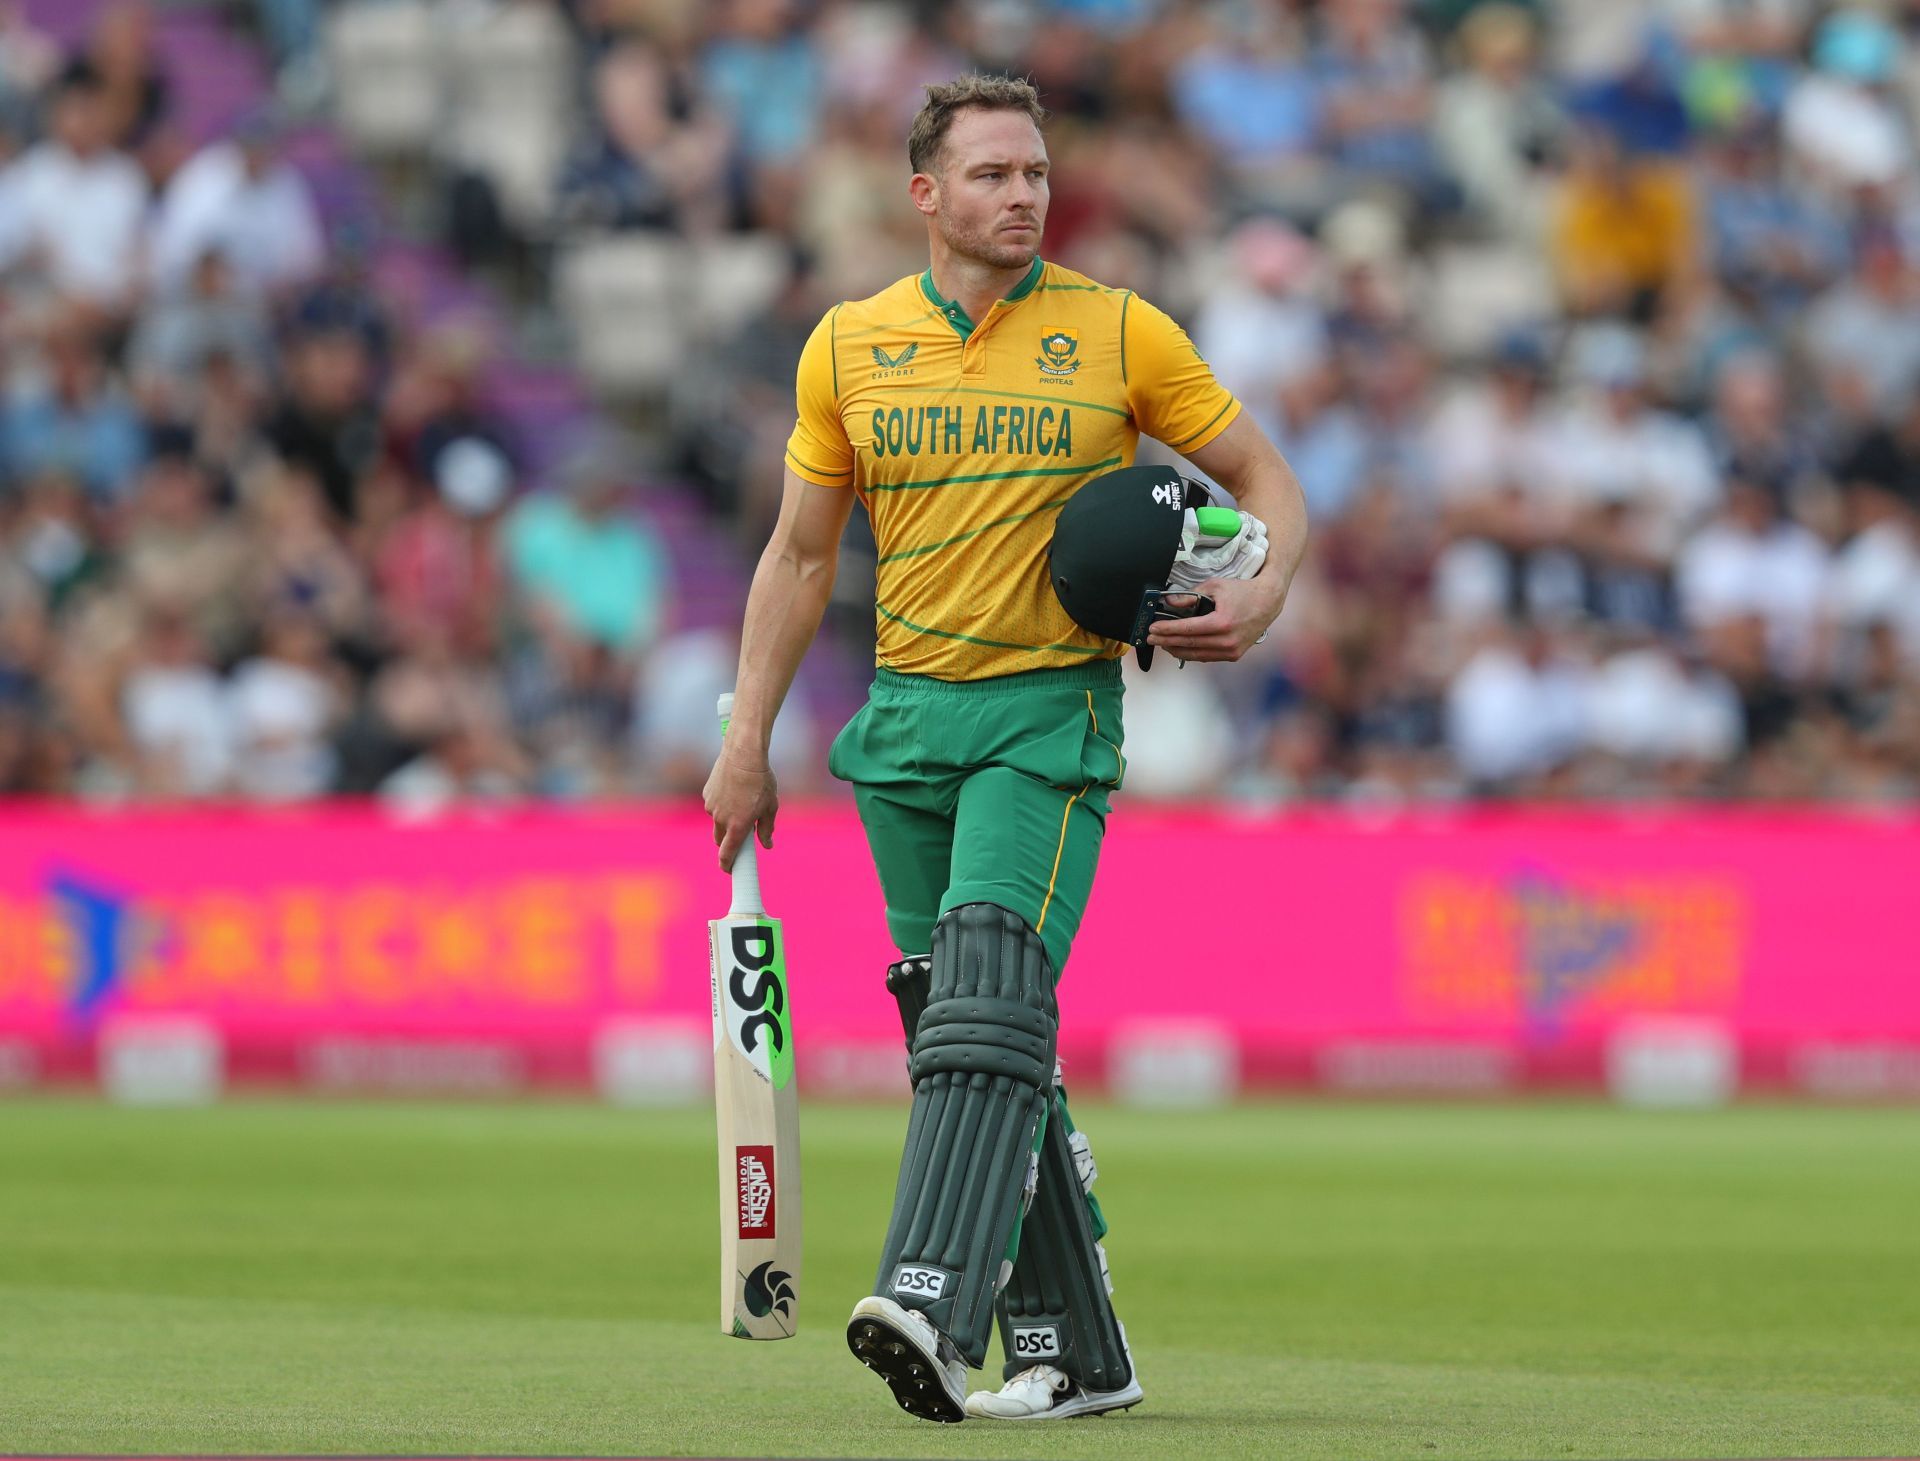 The Proteas ace is often called as &#039;Killer Miller&#039; because of his hitting ability